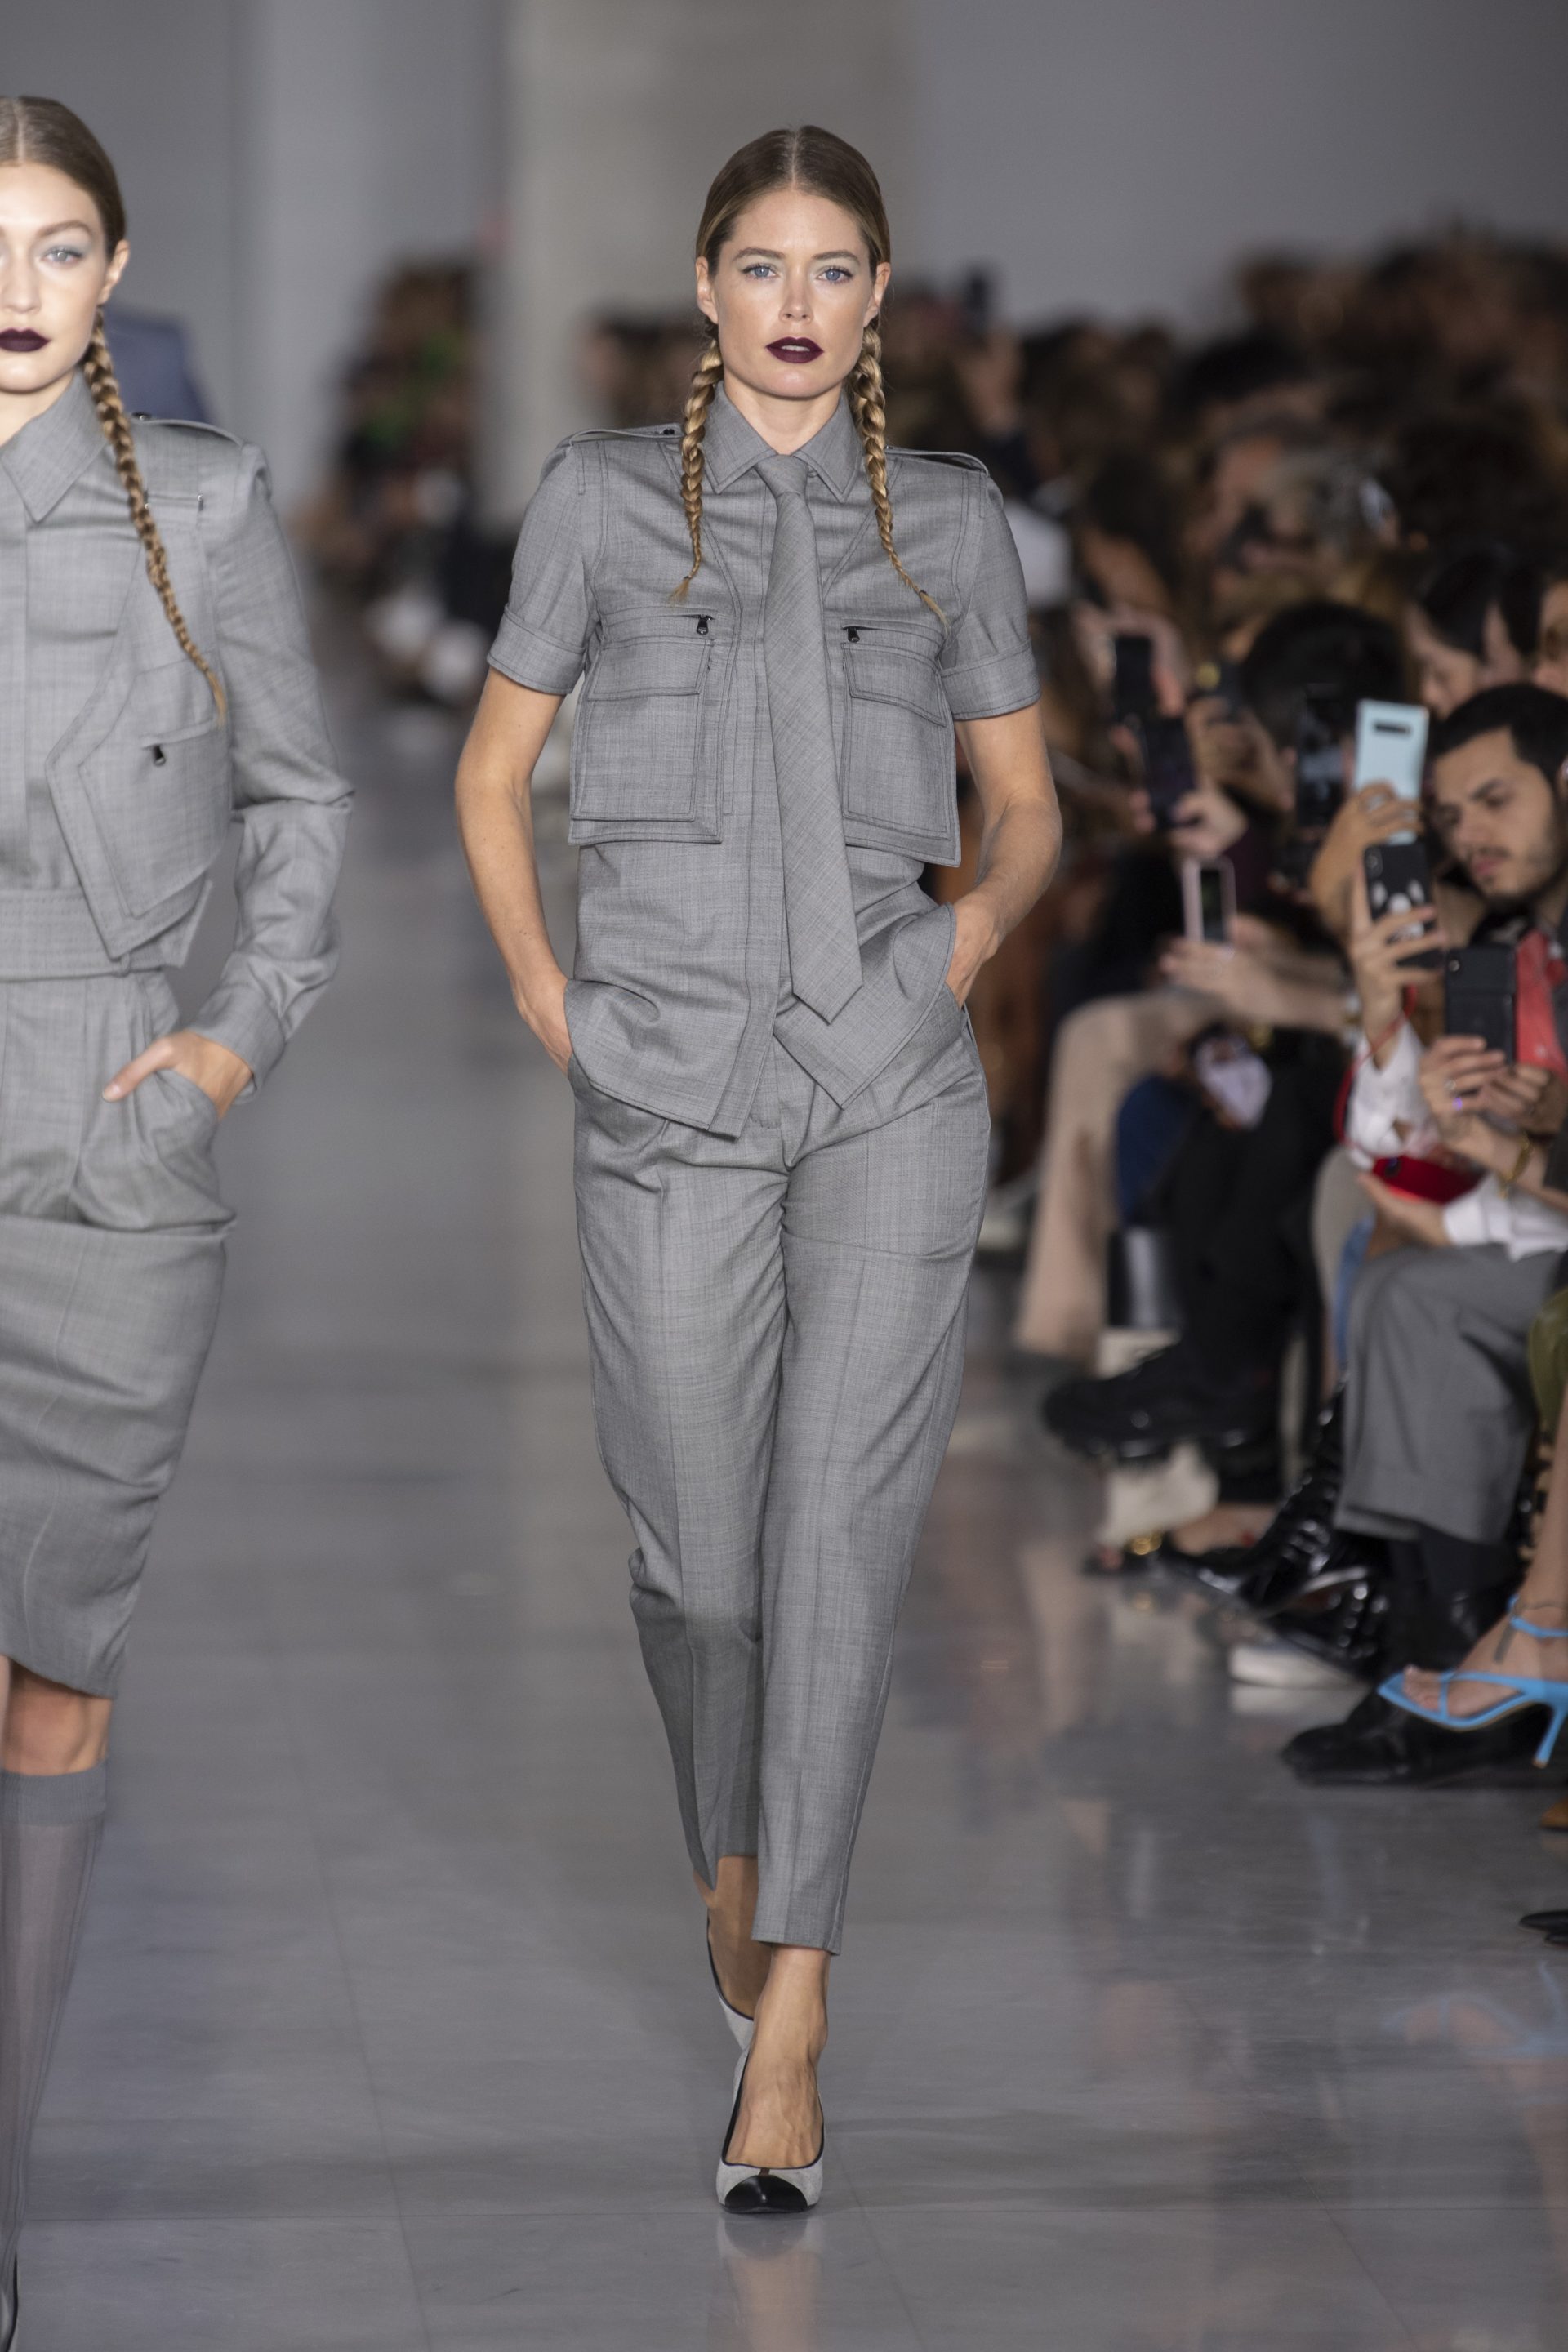 Max Mara Outfits Their Fantasy Spy Flick for Spring 2020